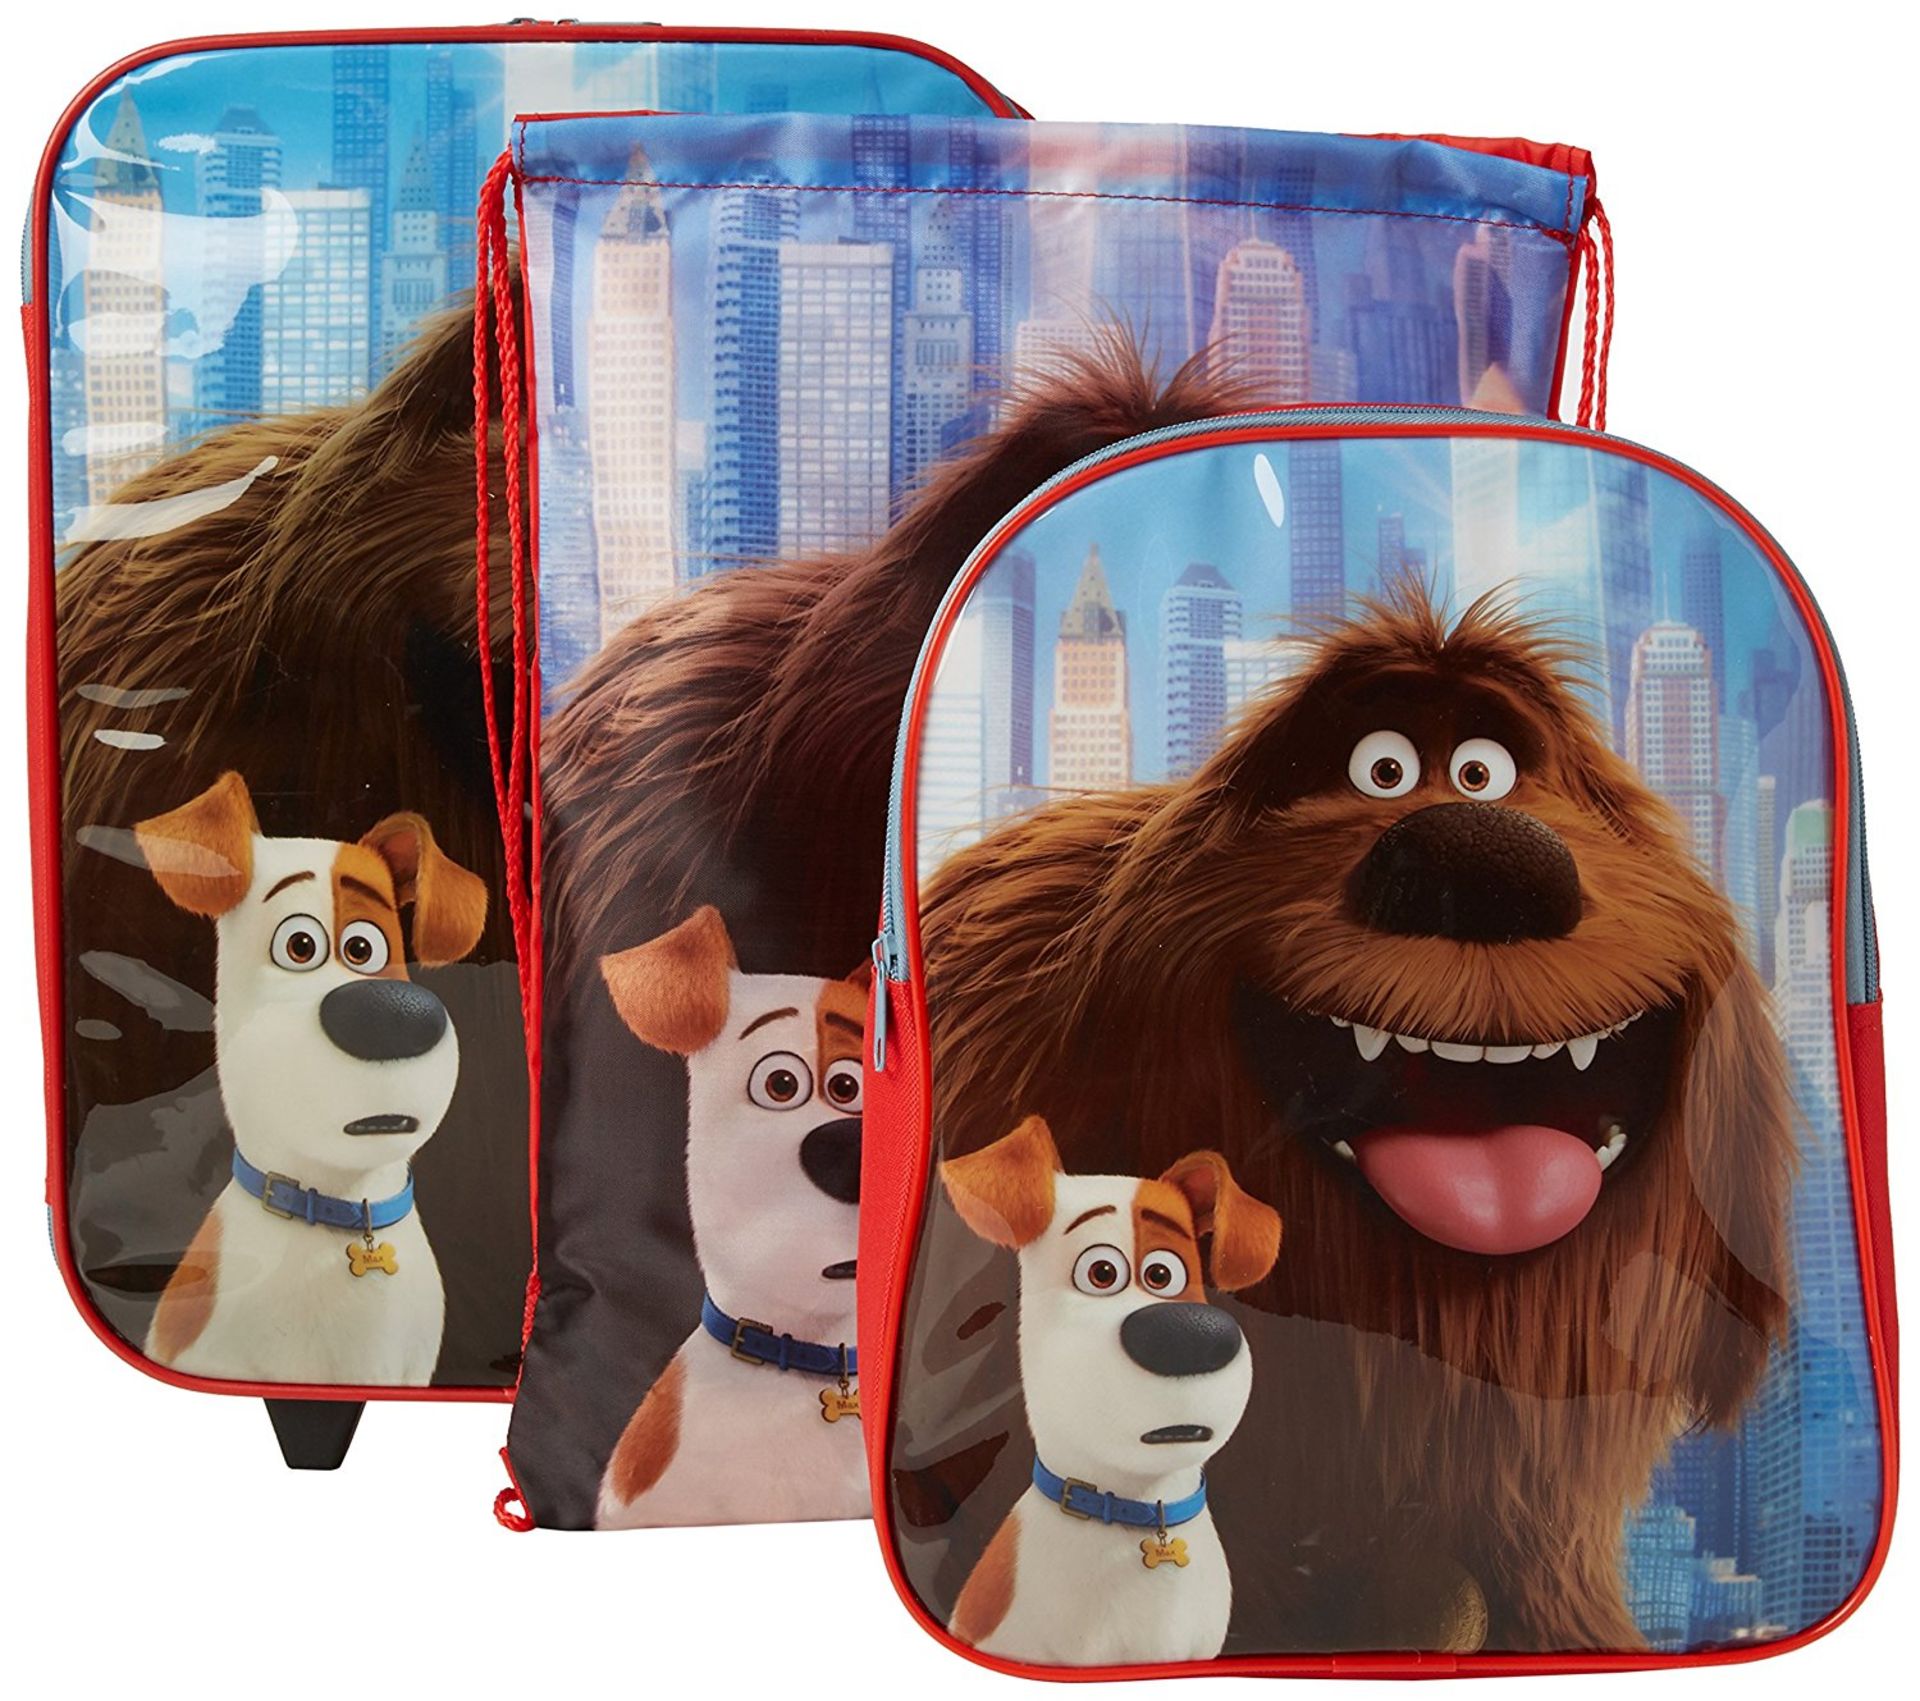 108 X Secret Life Of Pets 3Pce Travel Trolley Luggage Set [Brand New In Retail Packaging] - Image 6 of 6